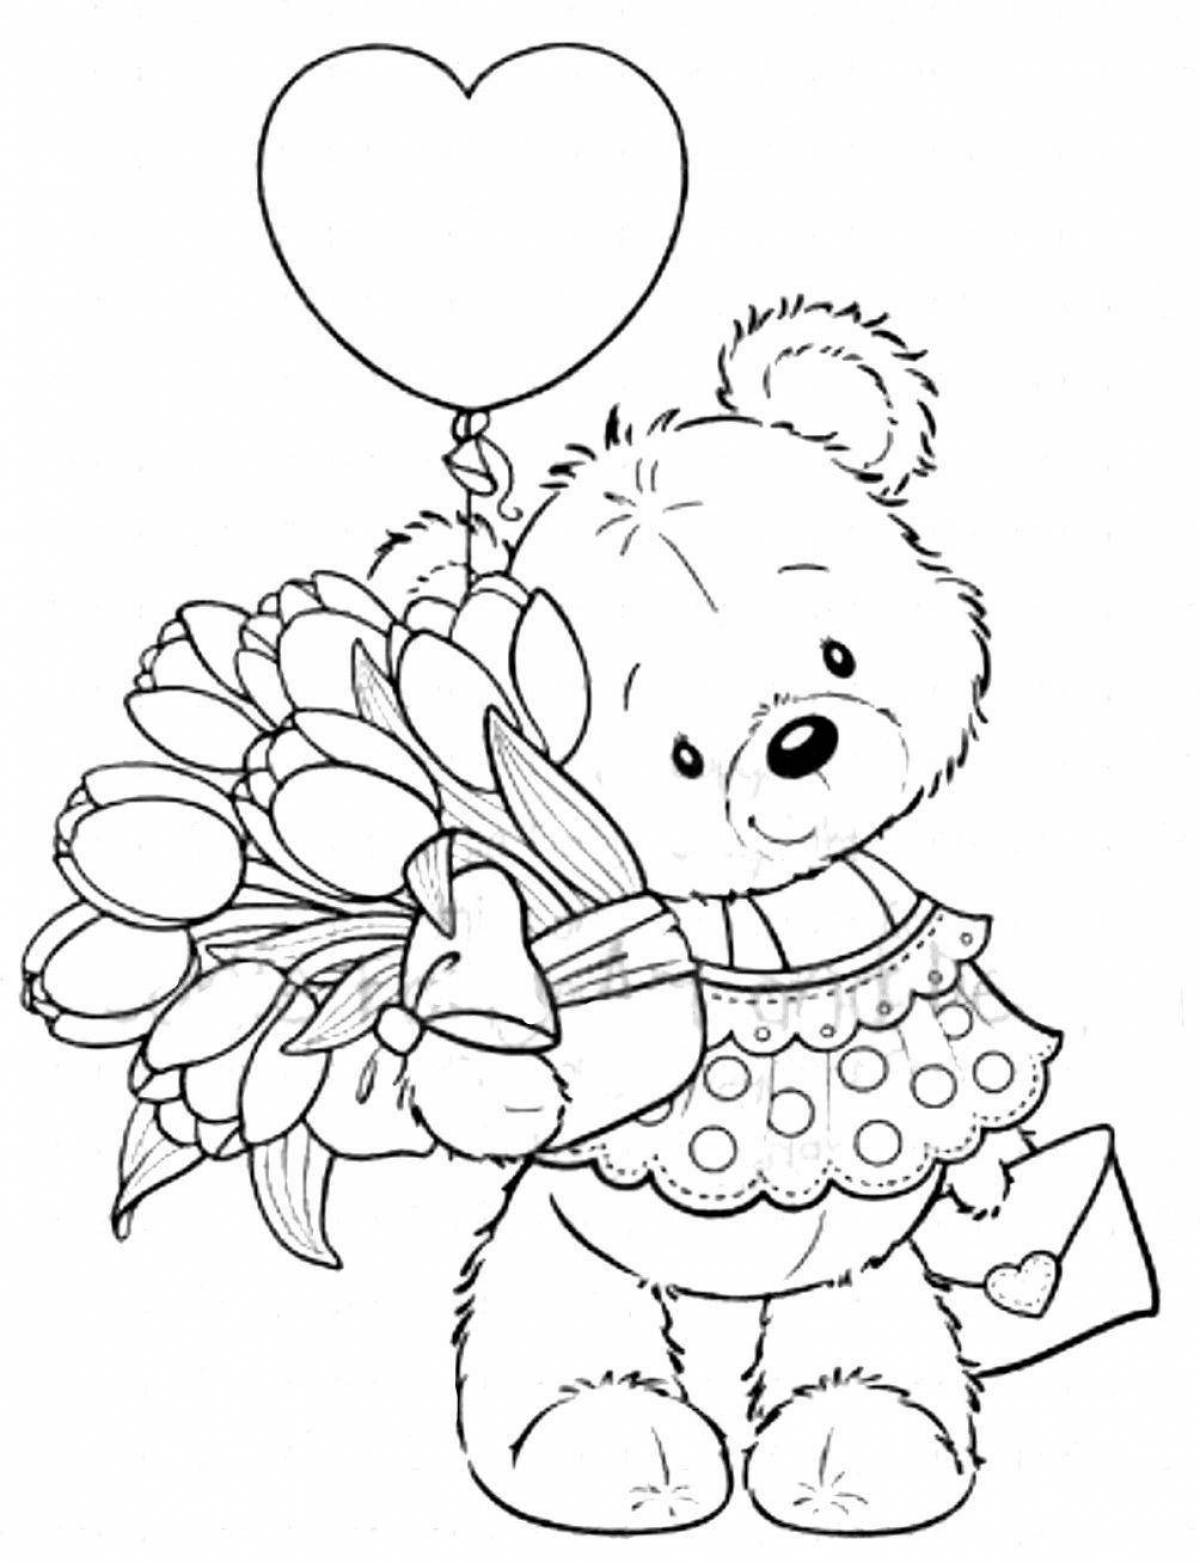 Coloring glowing bear with a gift